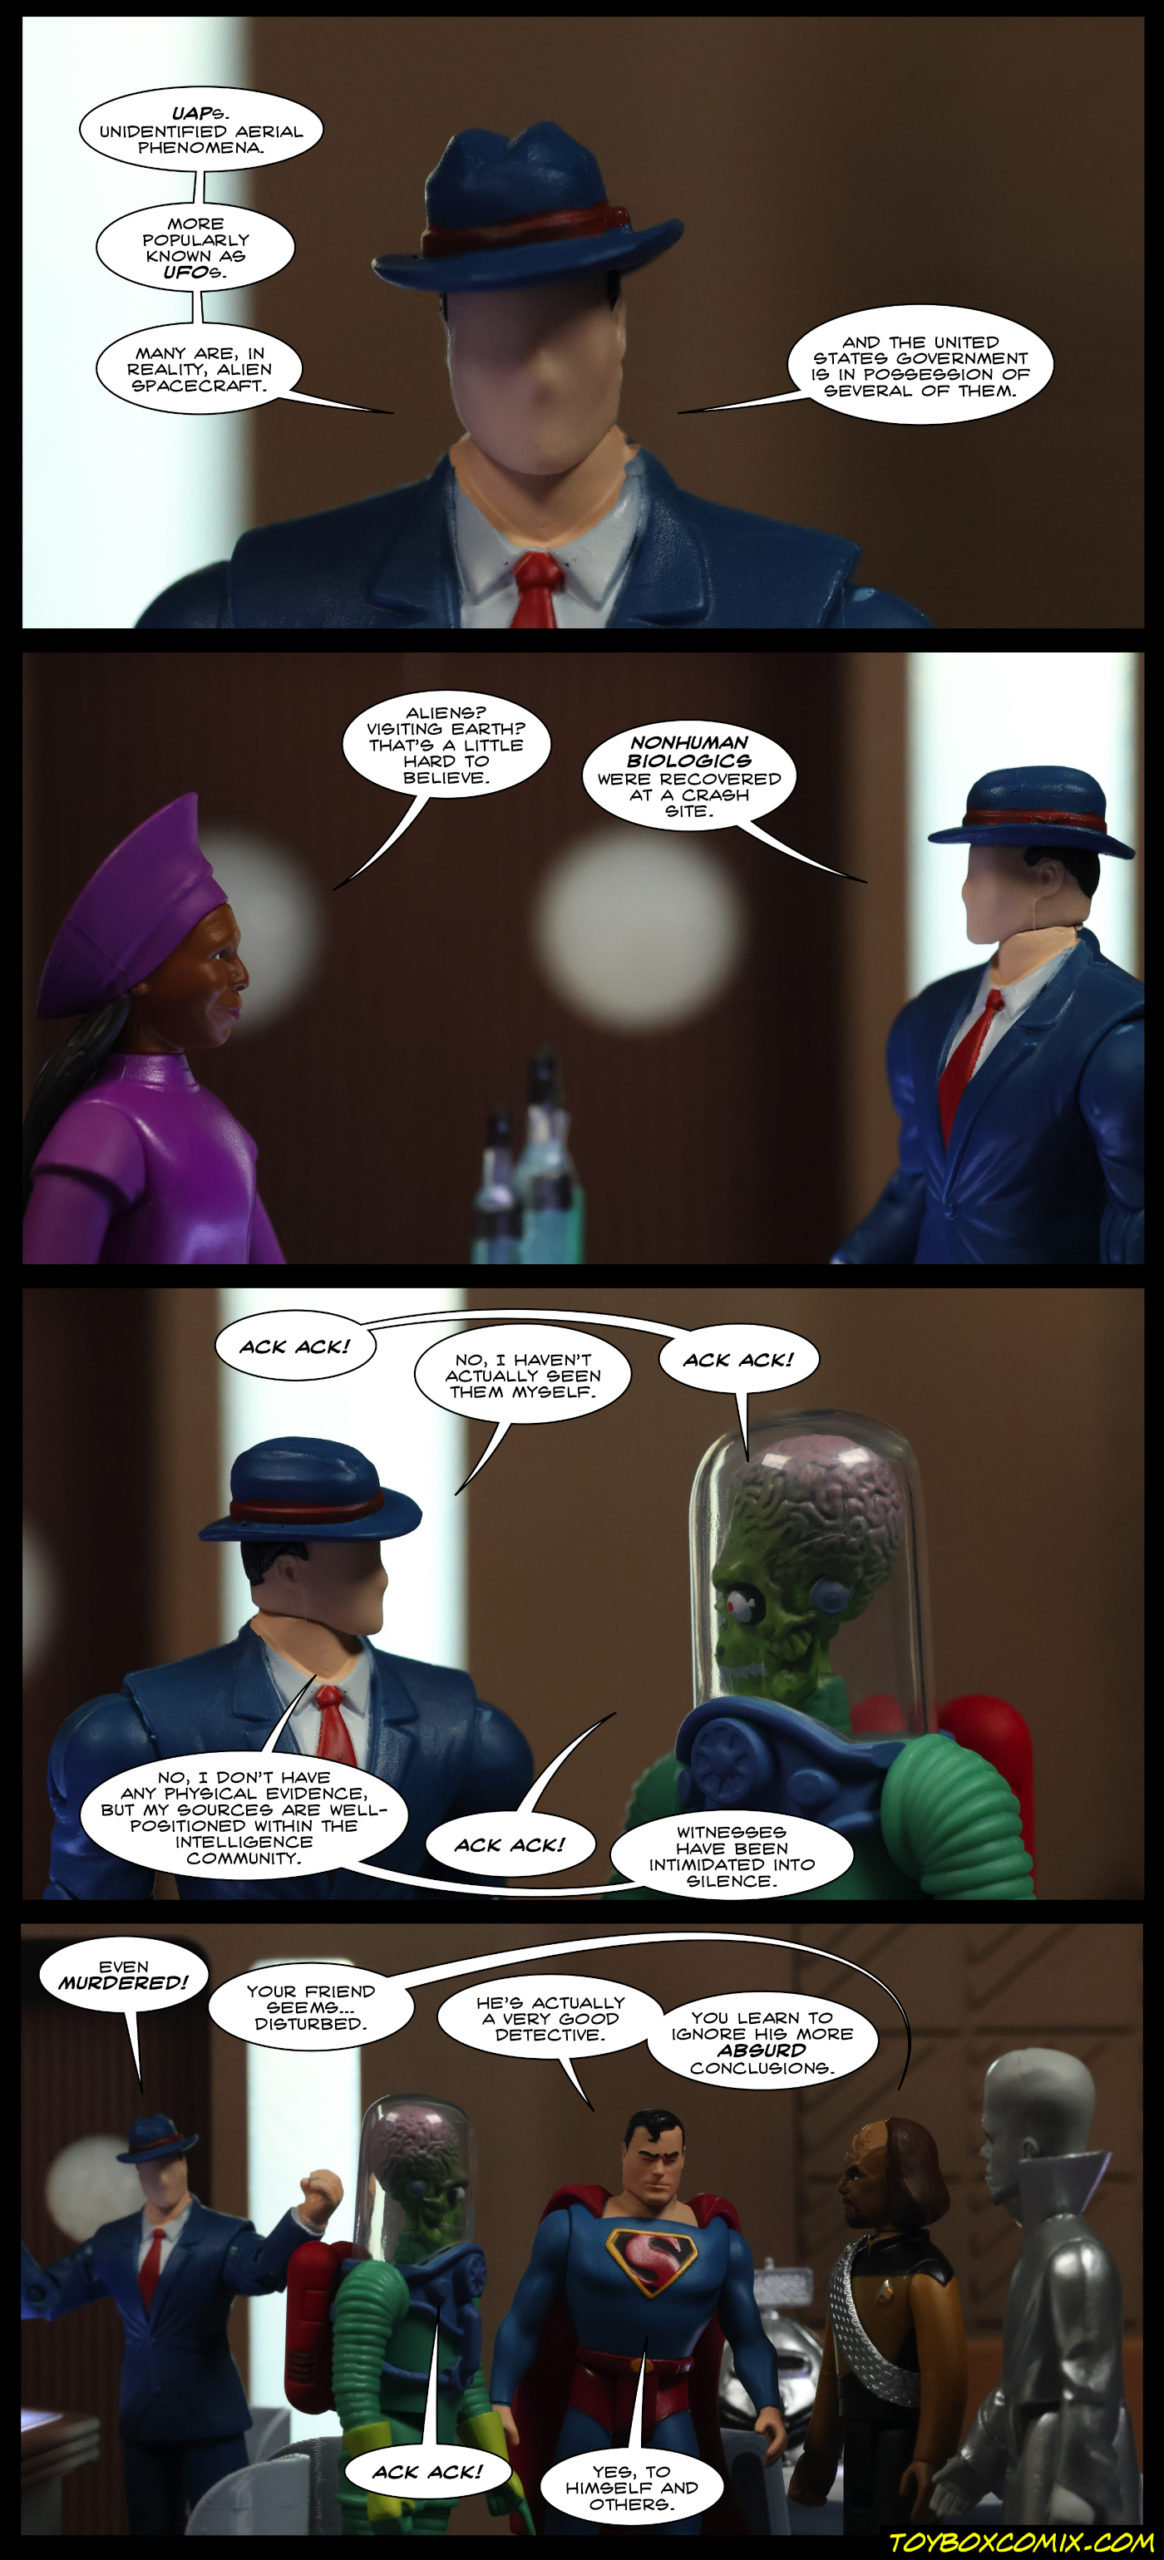 Location: Ten Forward. First panel: DC’s The Question: “UAPs. Unidentified Aerial Phenomena. Mors popularly known as UFOs. Many are, in reality, alien spacecraft. And the United States Government is in possession of several of them.” Second panel: Guinan: “Aliens? Visiting Earth? That’s a little hard to believe.” Question: “Nonhuman biologics were recovered at a crash site.” Third panel: Mars Attacks Martian: “Ack ack!” Question: “No, I haven’t actually seen them myself.” Martian: “Ack ack!” Question: “No, I don’t have any physical evidence, but my sources are well-positioned within the intelligence community.” Martian: “Ack ack!” Question: “Witnesses have been intimidated into silence.” Fourth panel: Question, in the background: “Even murdered!” Worf, in the foreground: “Your friend seems…disturbed.” Superman: “He’s actually a very good detective. You learn to ignore his more absurd conclusions.” Martian: “Ack ack!” Superman: “Yes, to himself and others.”